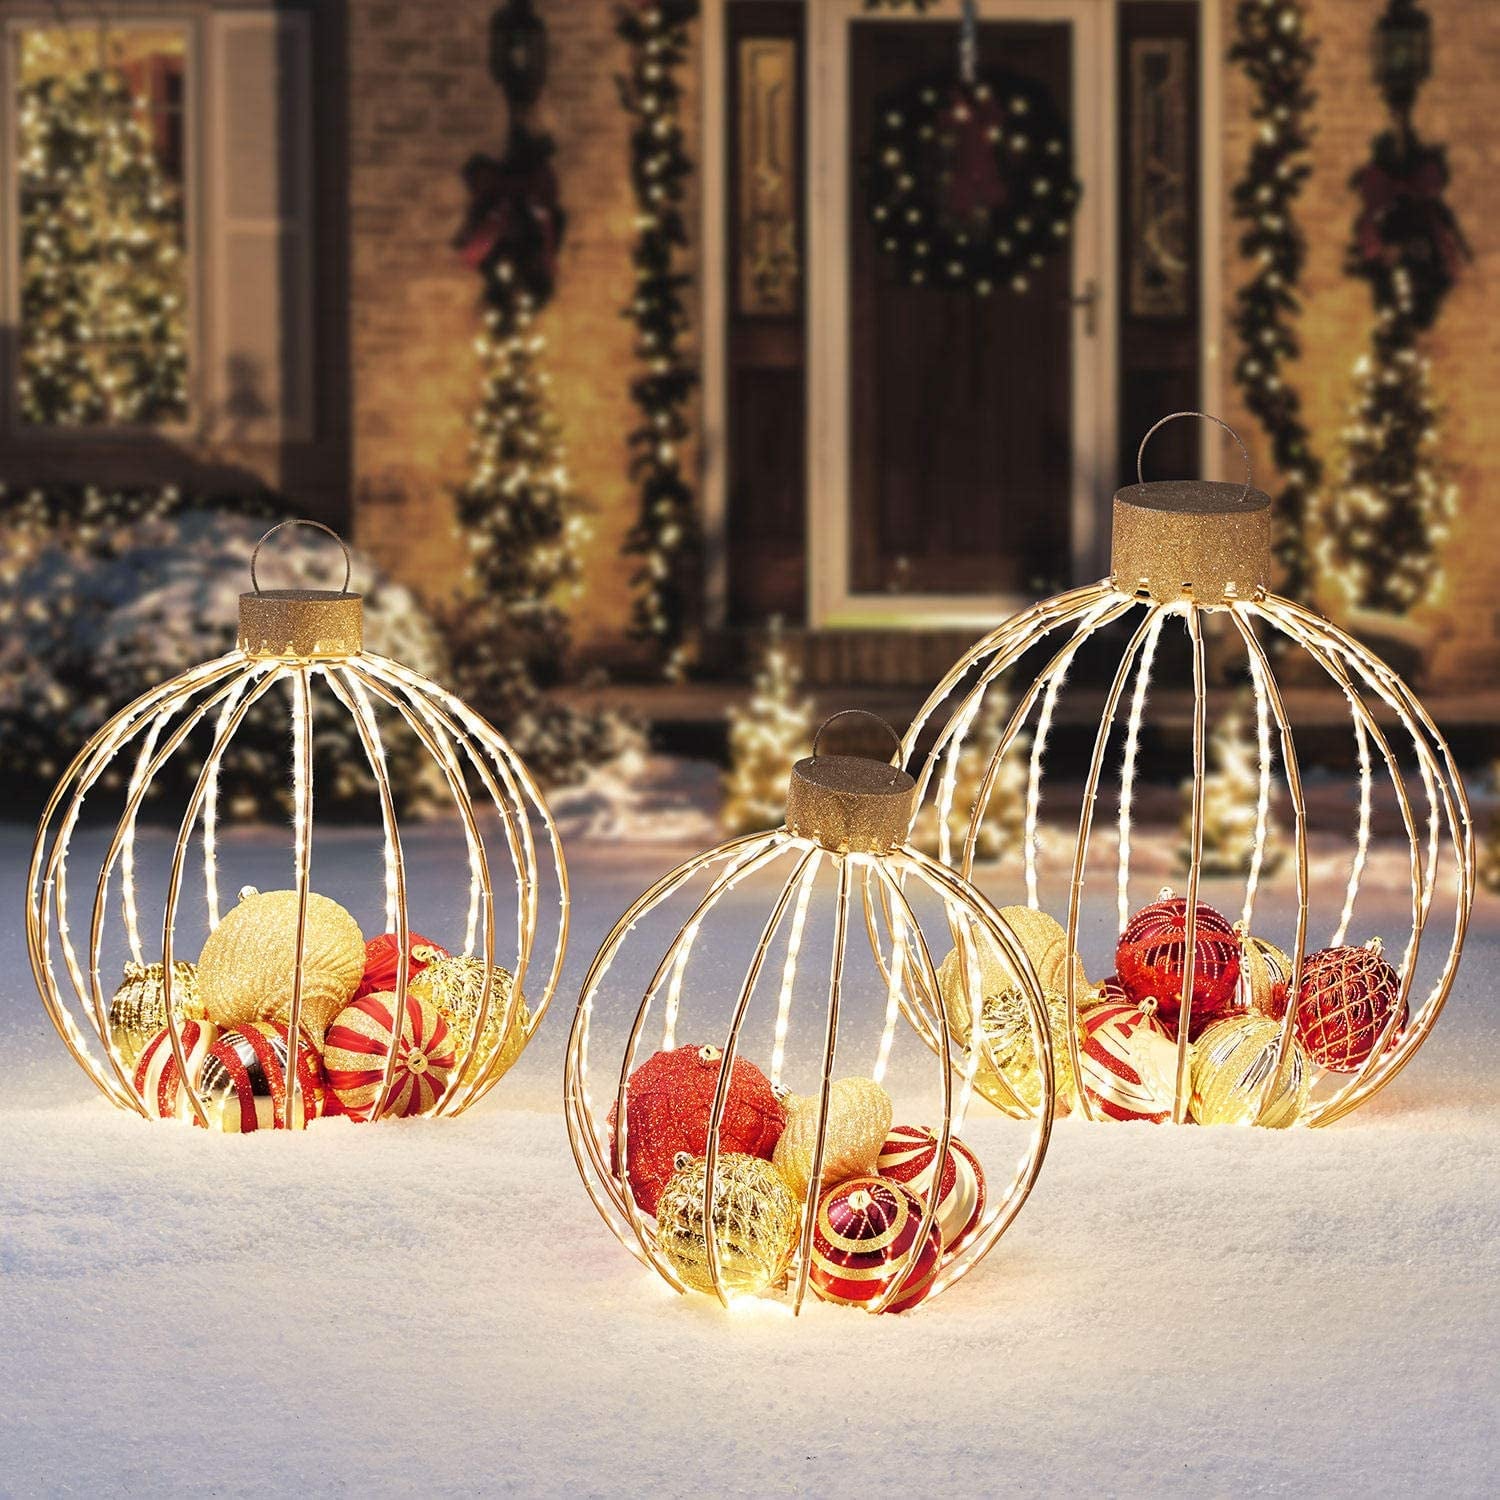 3PCS Hanging Plastic Christmas Balls for Tree Christmas,Holiday Xmas Party Snowman Christmas Ornaments LED Colorful Balls with Snowflake Party for Decoration,Home Decor